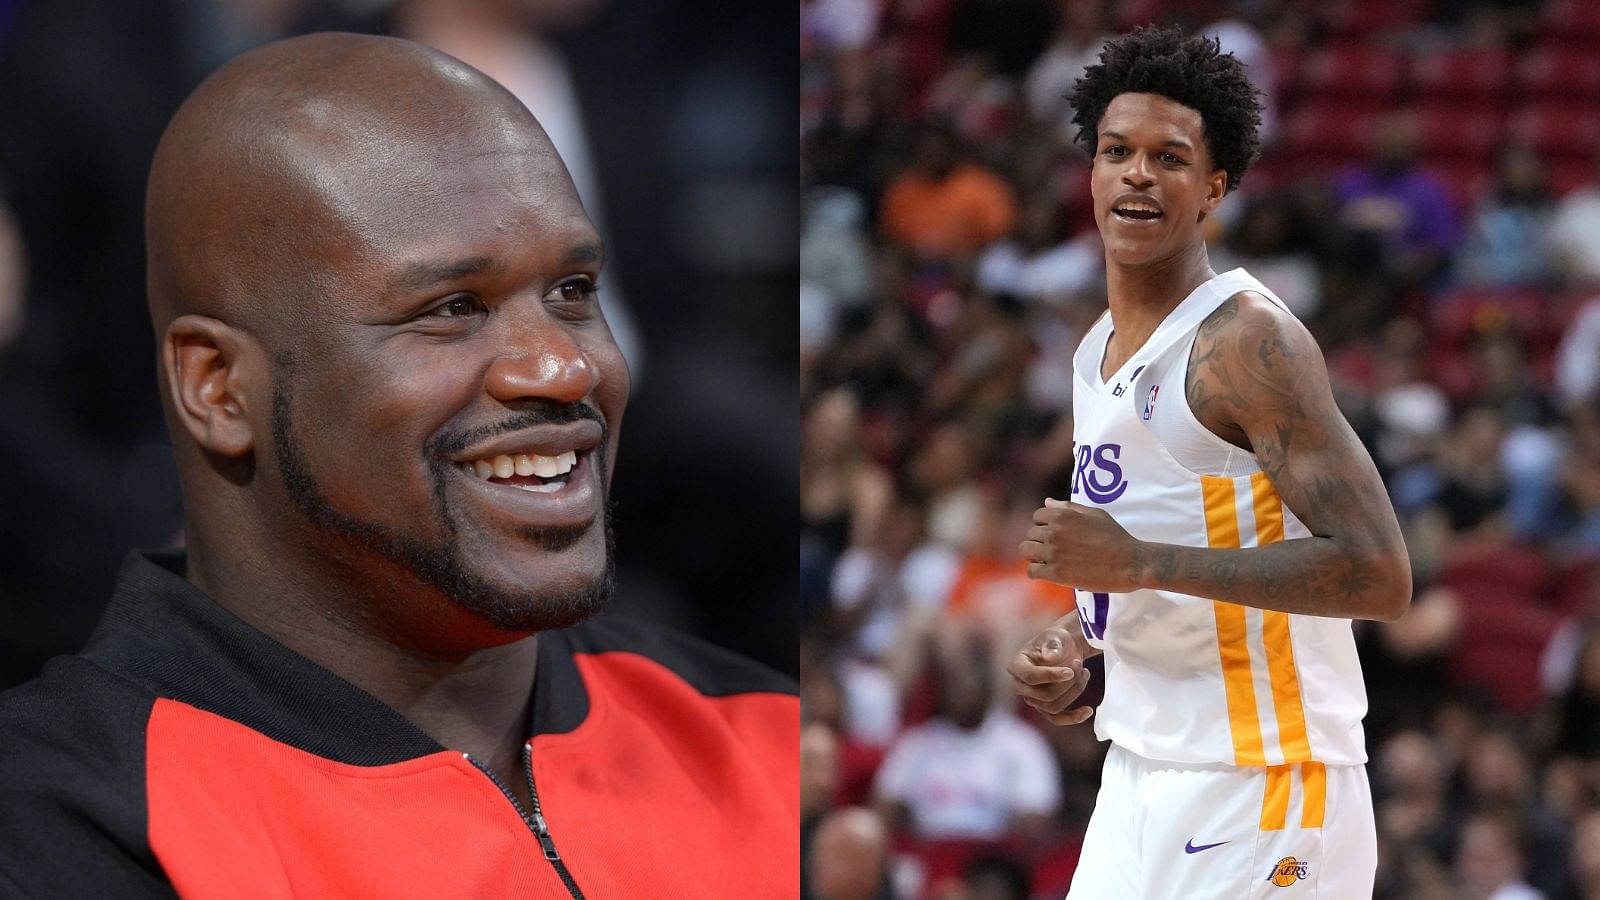 Shaquille O'Neal claims Shareef O'Neal’s first sentence was “daddy win for me” when he was just 5-6 months old